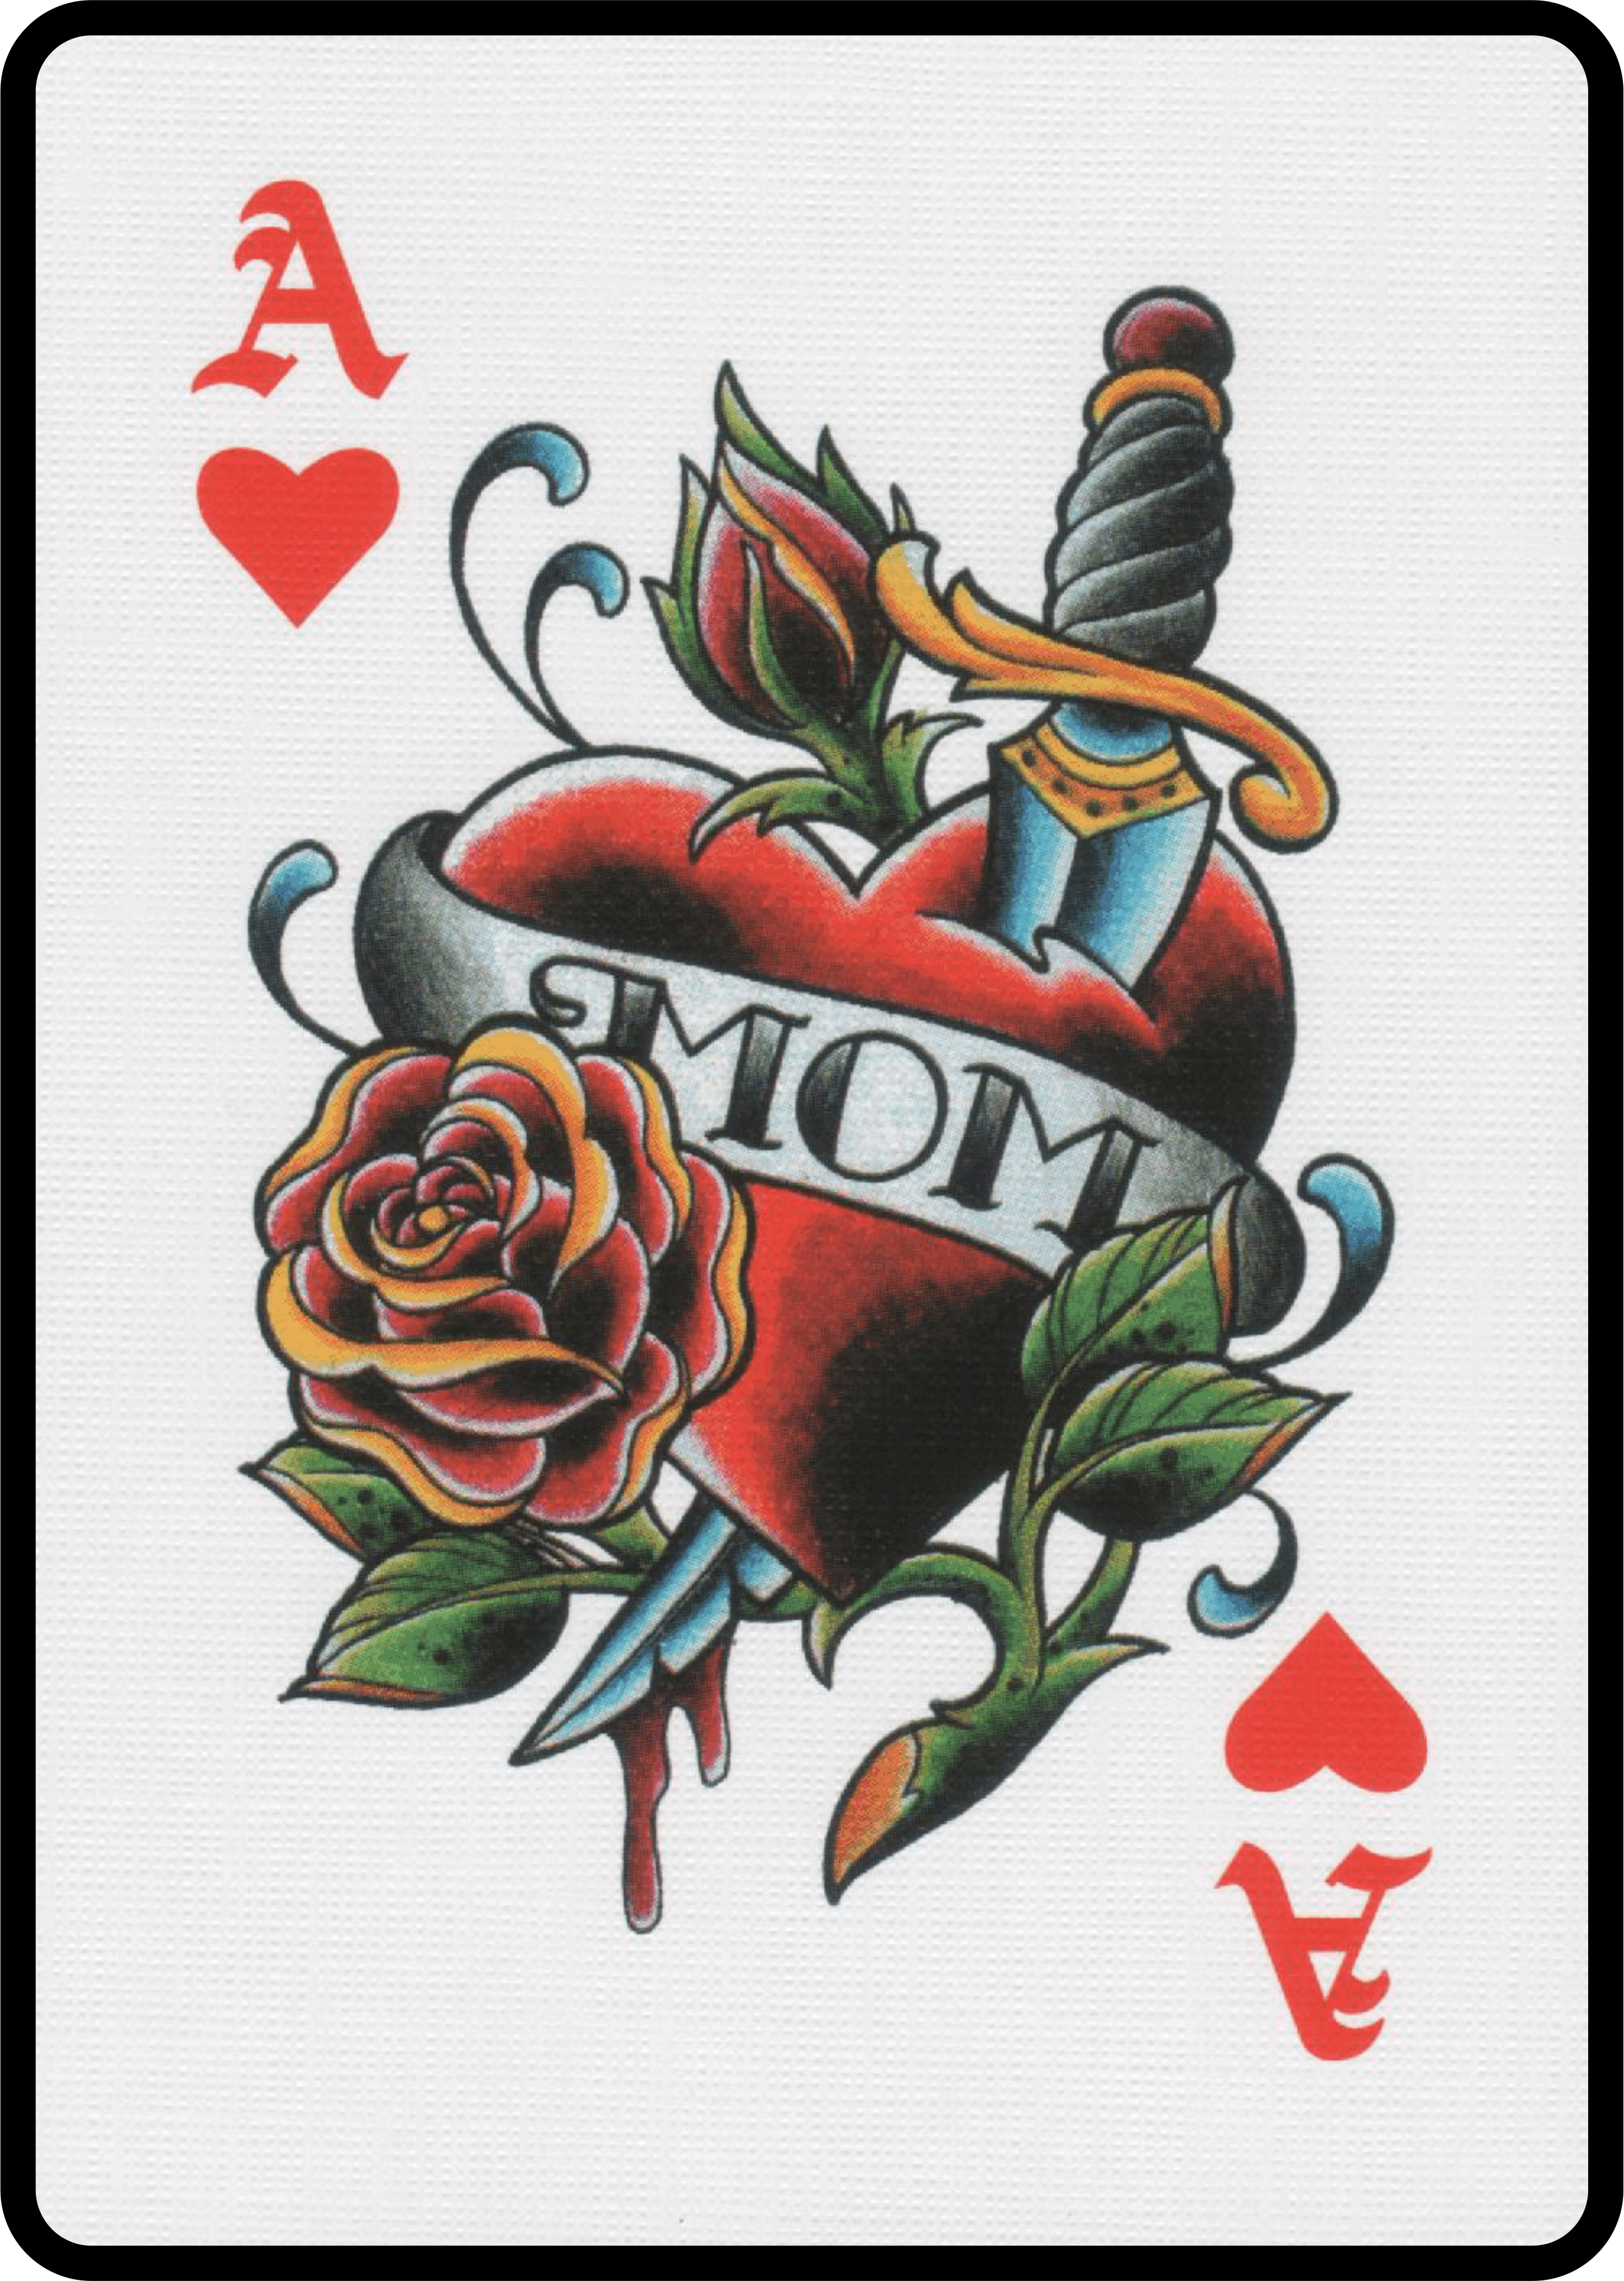 Bicycle Club Tattoo Ace of Hearts Deck designed by artists from the Club Ta...